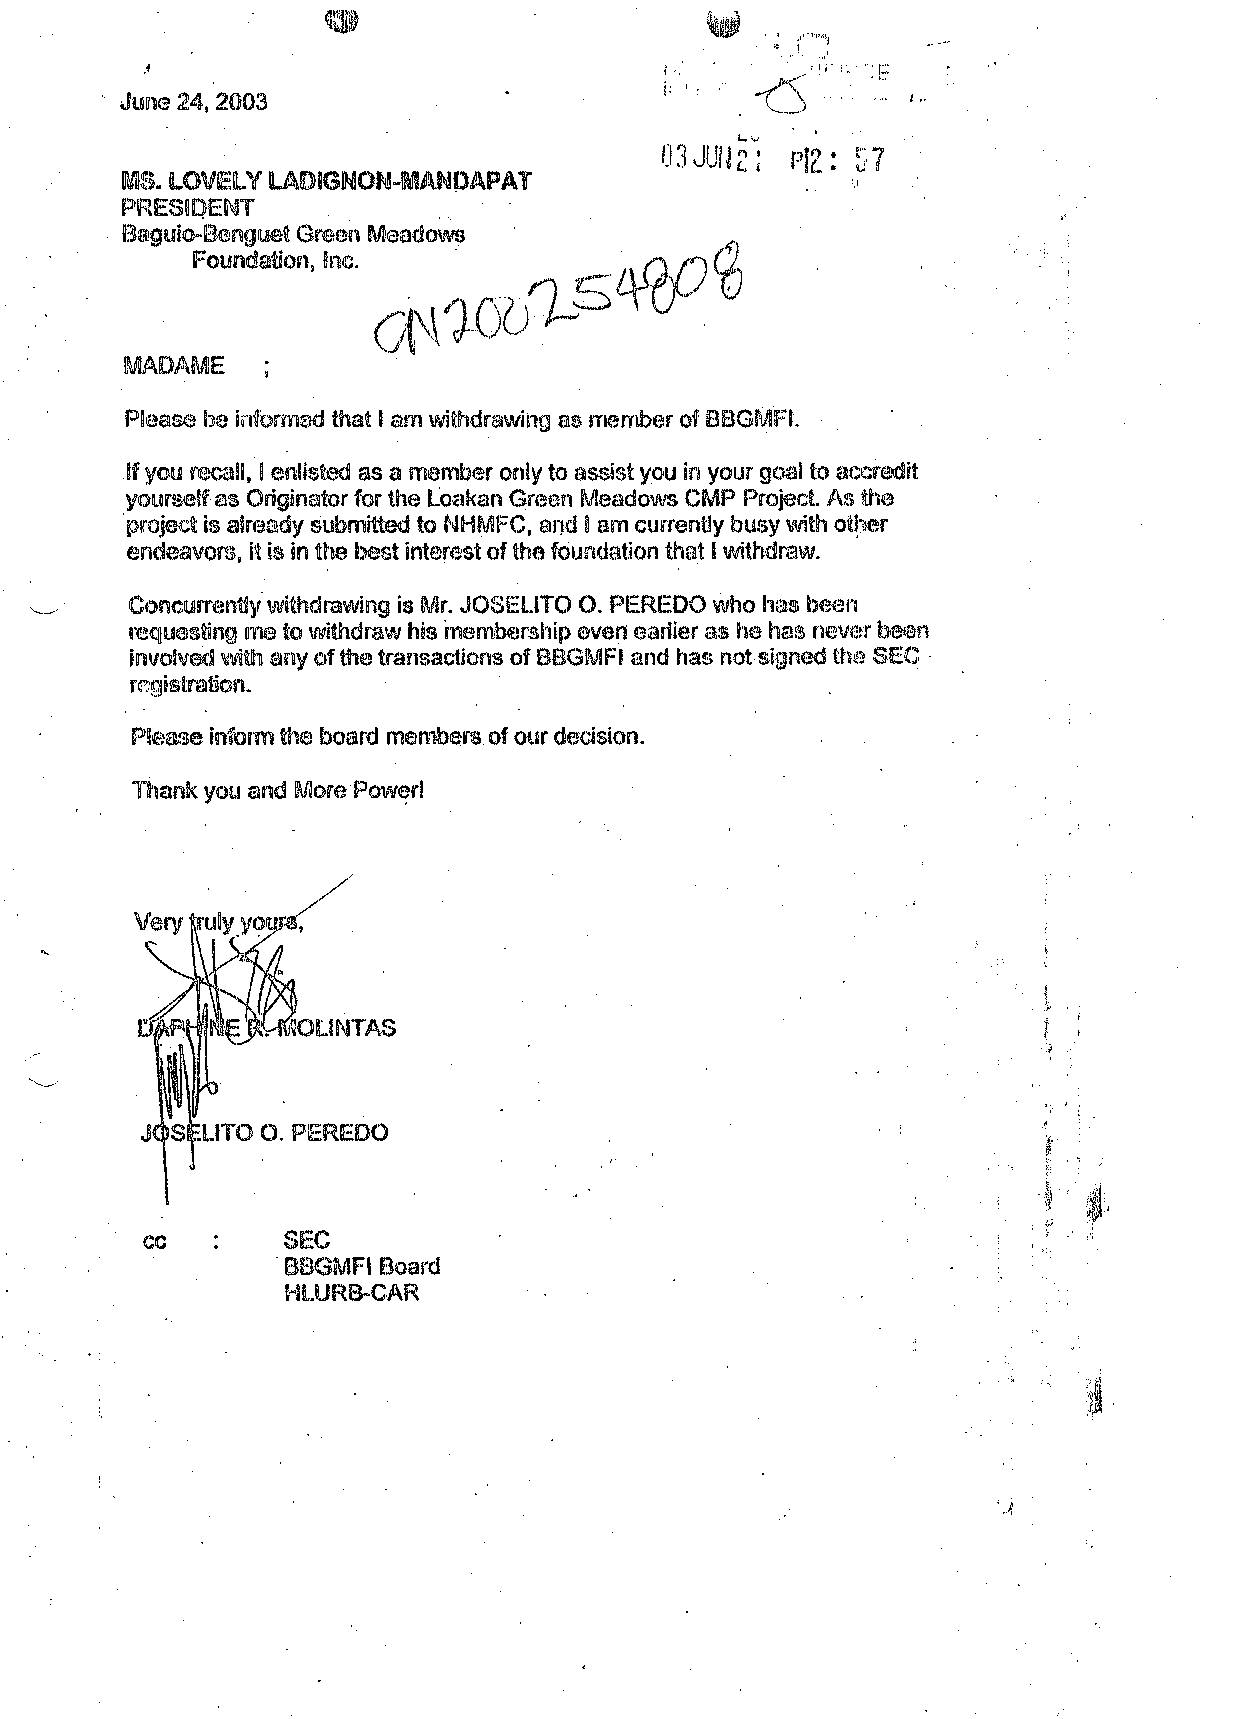 23 June 2003 letter copied to the Securities and Exchange Commission ...